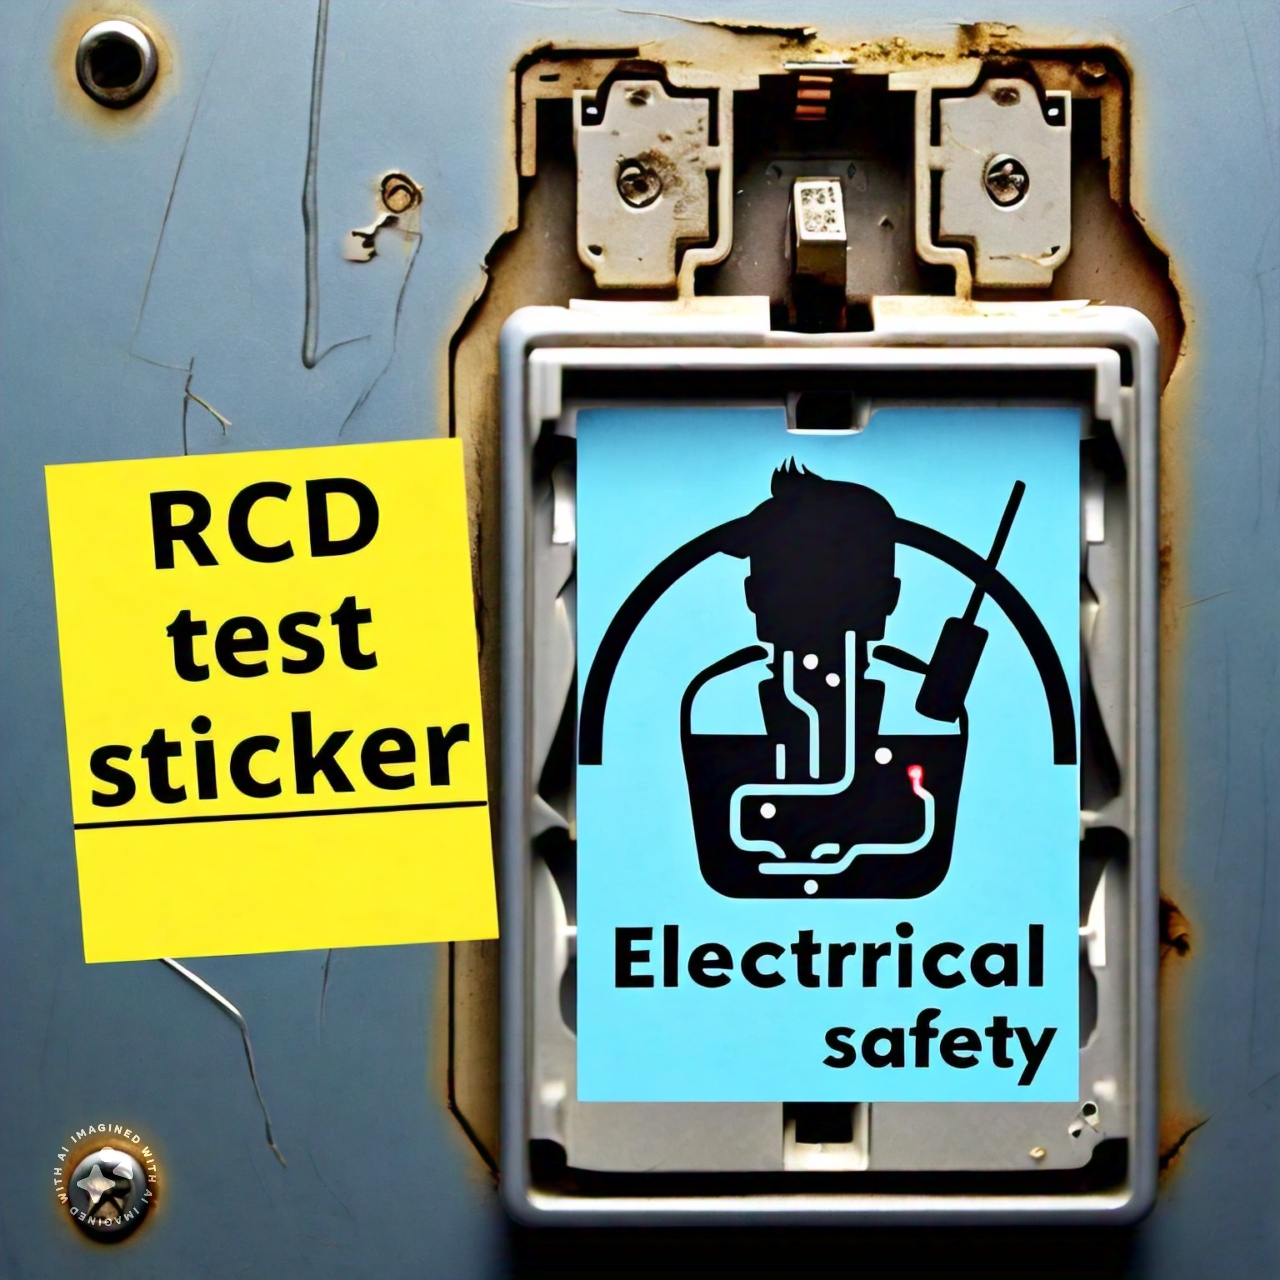 RCD Test Stickers: Ensuring Electrical Safety